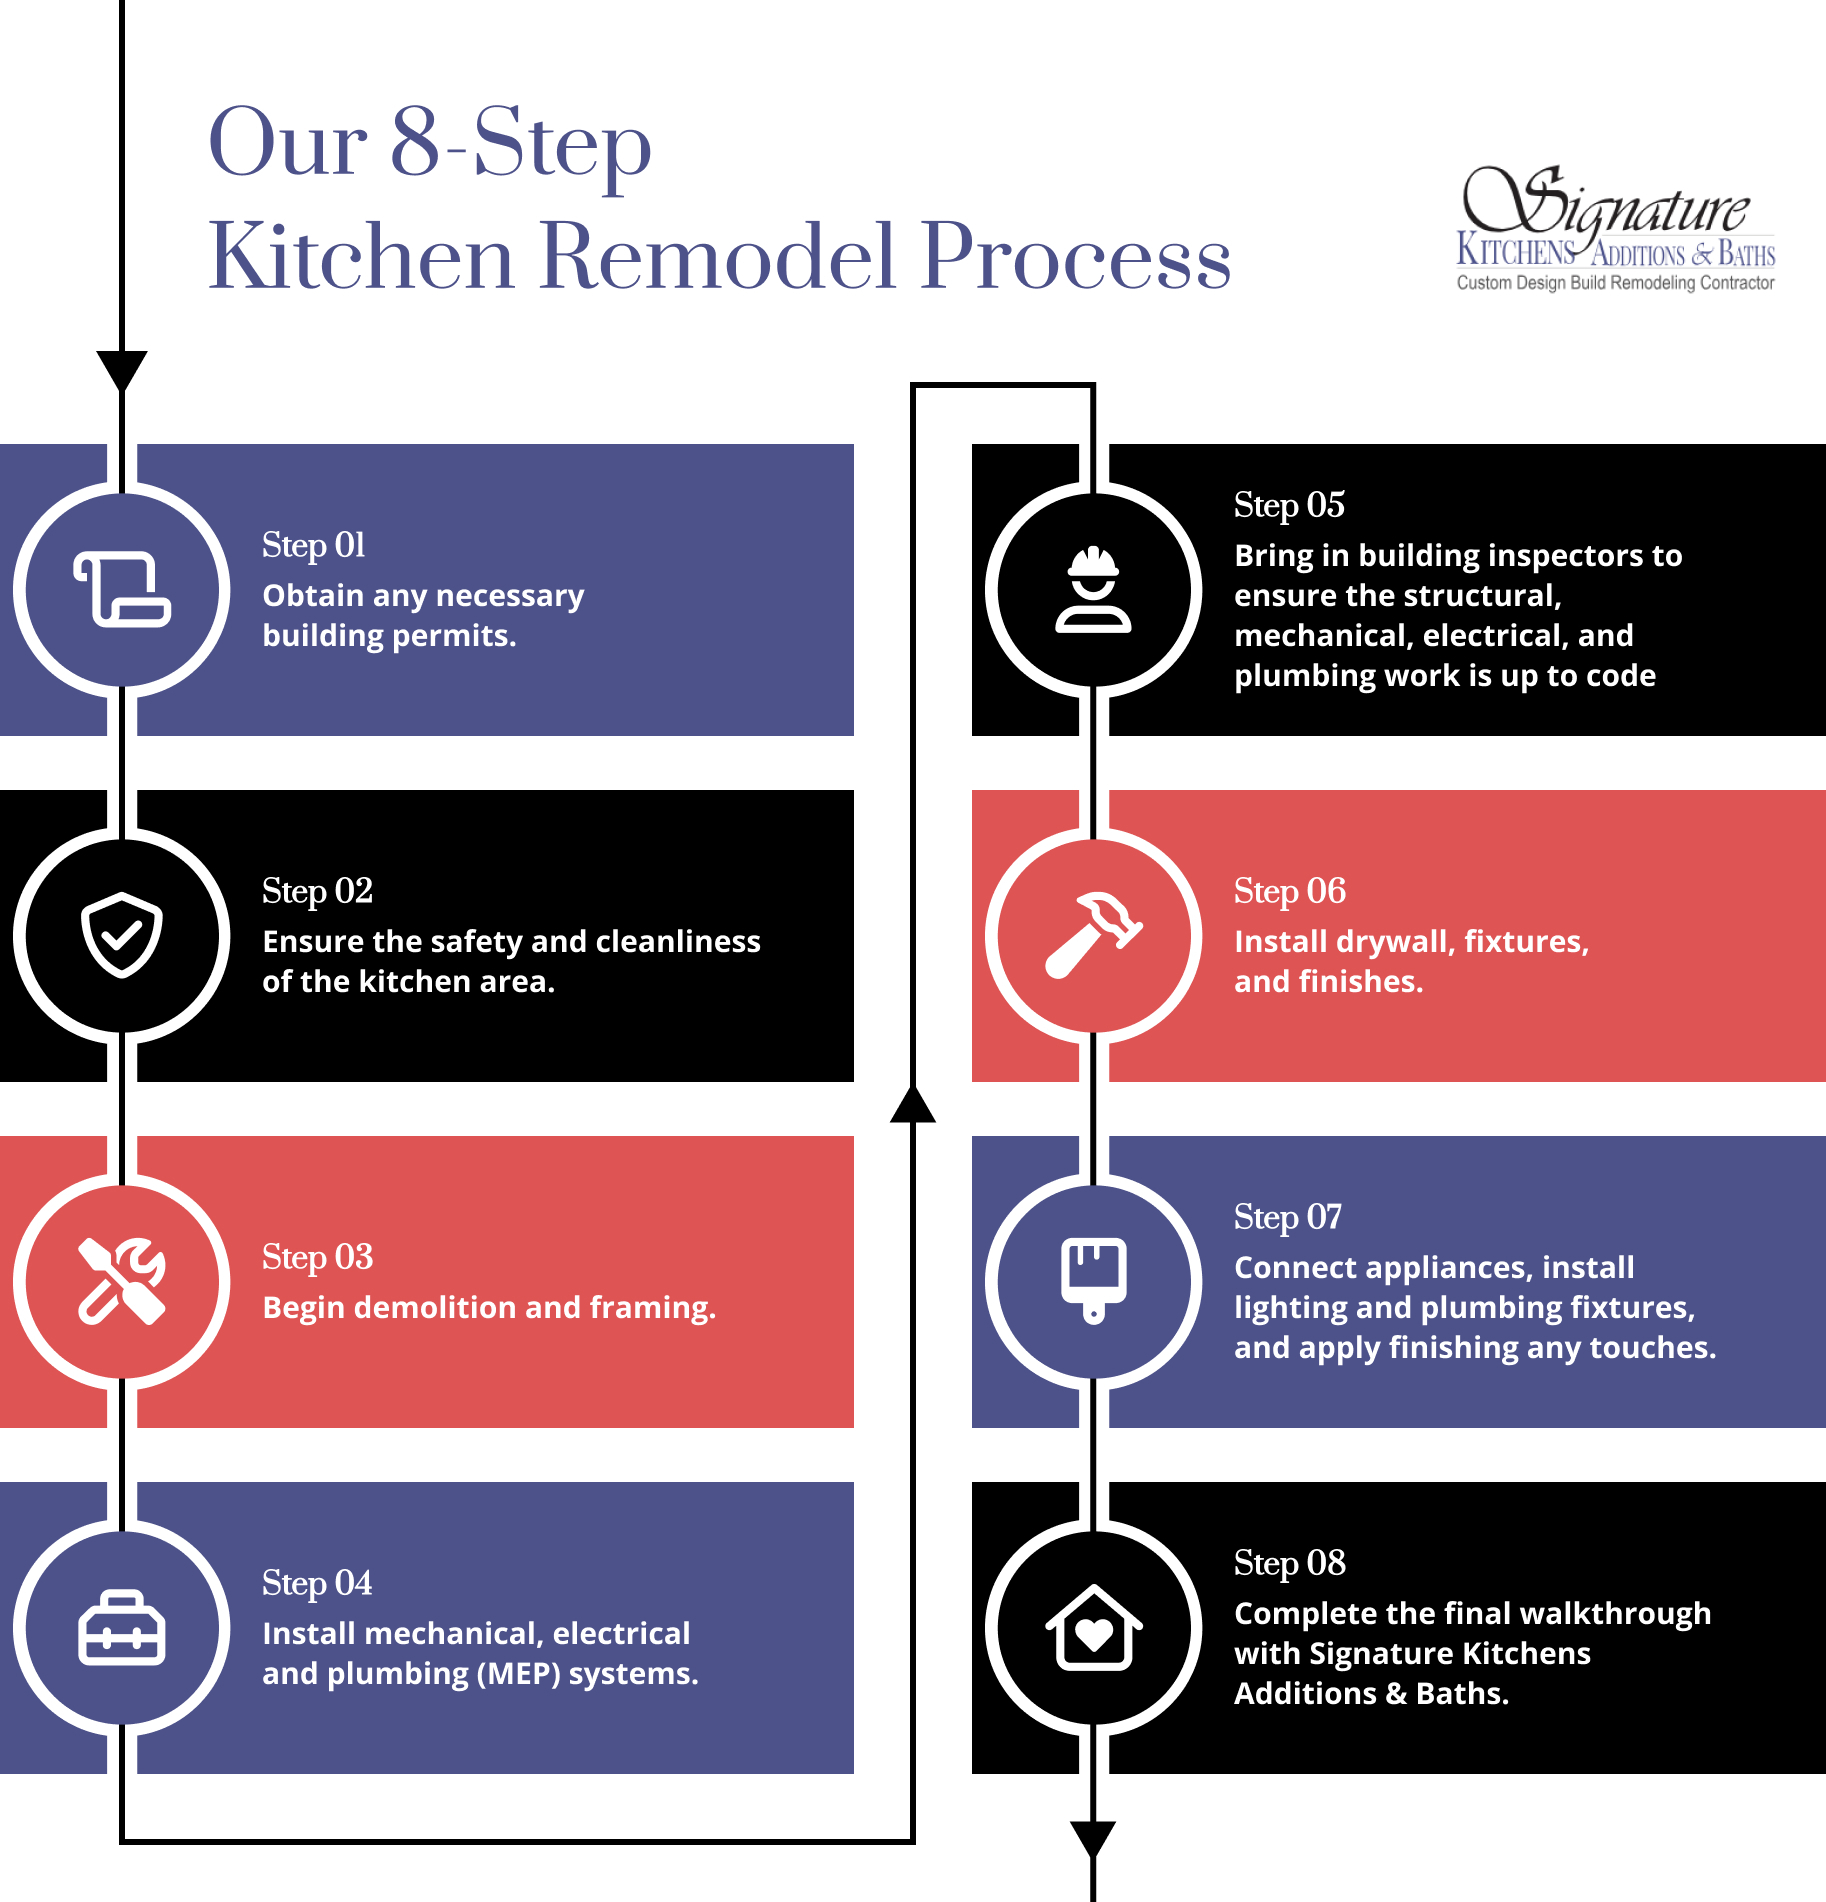 Infographic outlining Signature Kitchens Additions & Baths' 8-step kitchen remodel process.